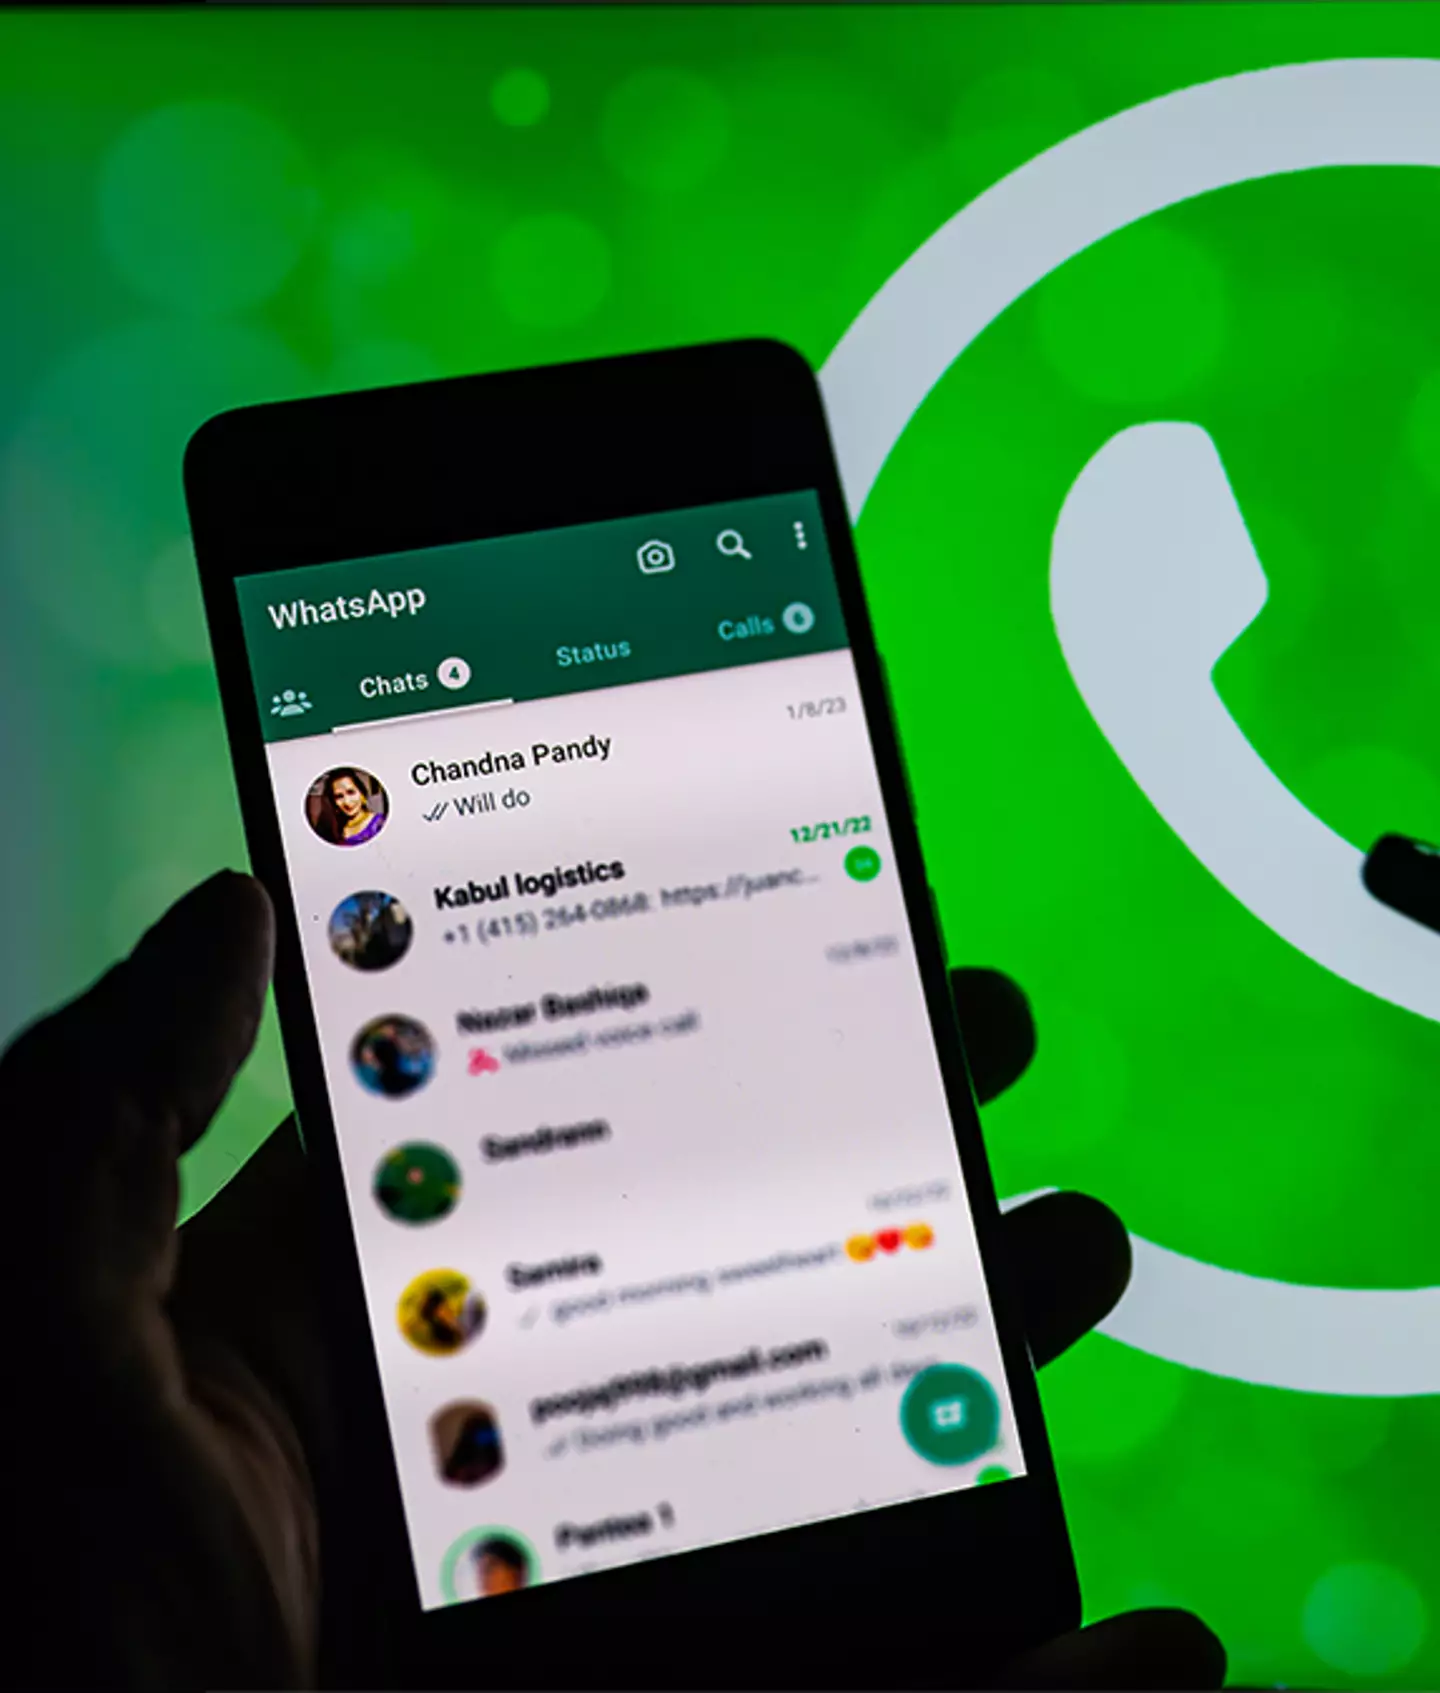 The feature is reportedly available in the WhatsApp beta version 2.24.5.6 / NurPhoto / Contributor / Getty